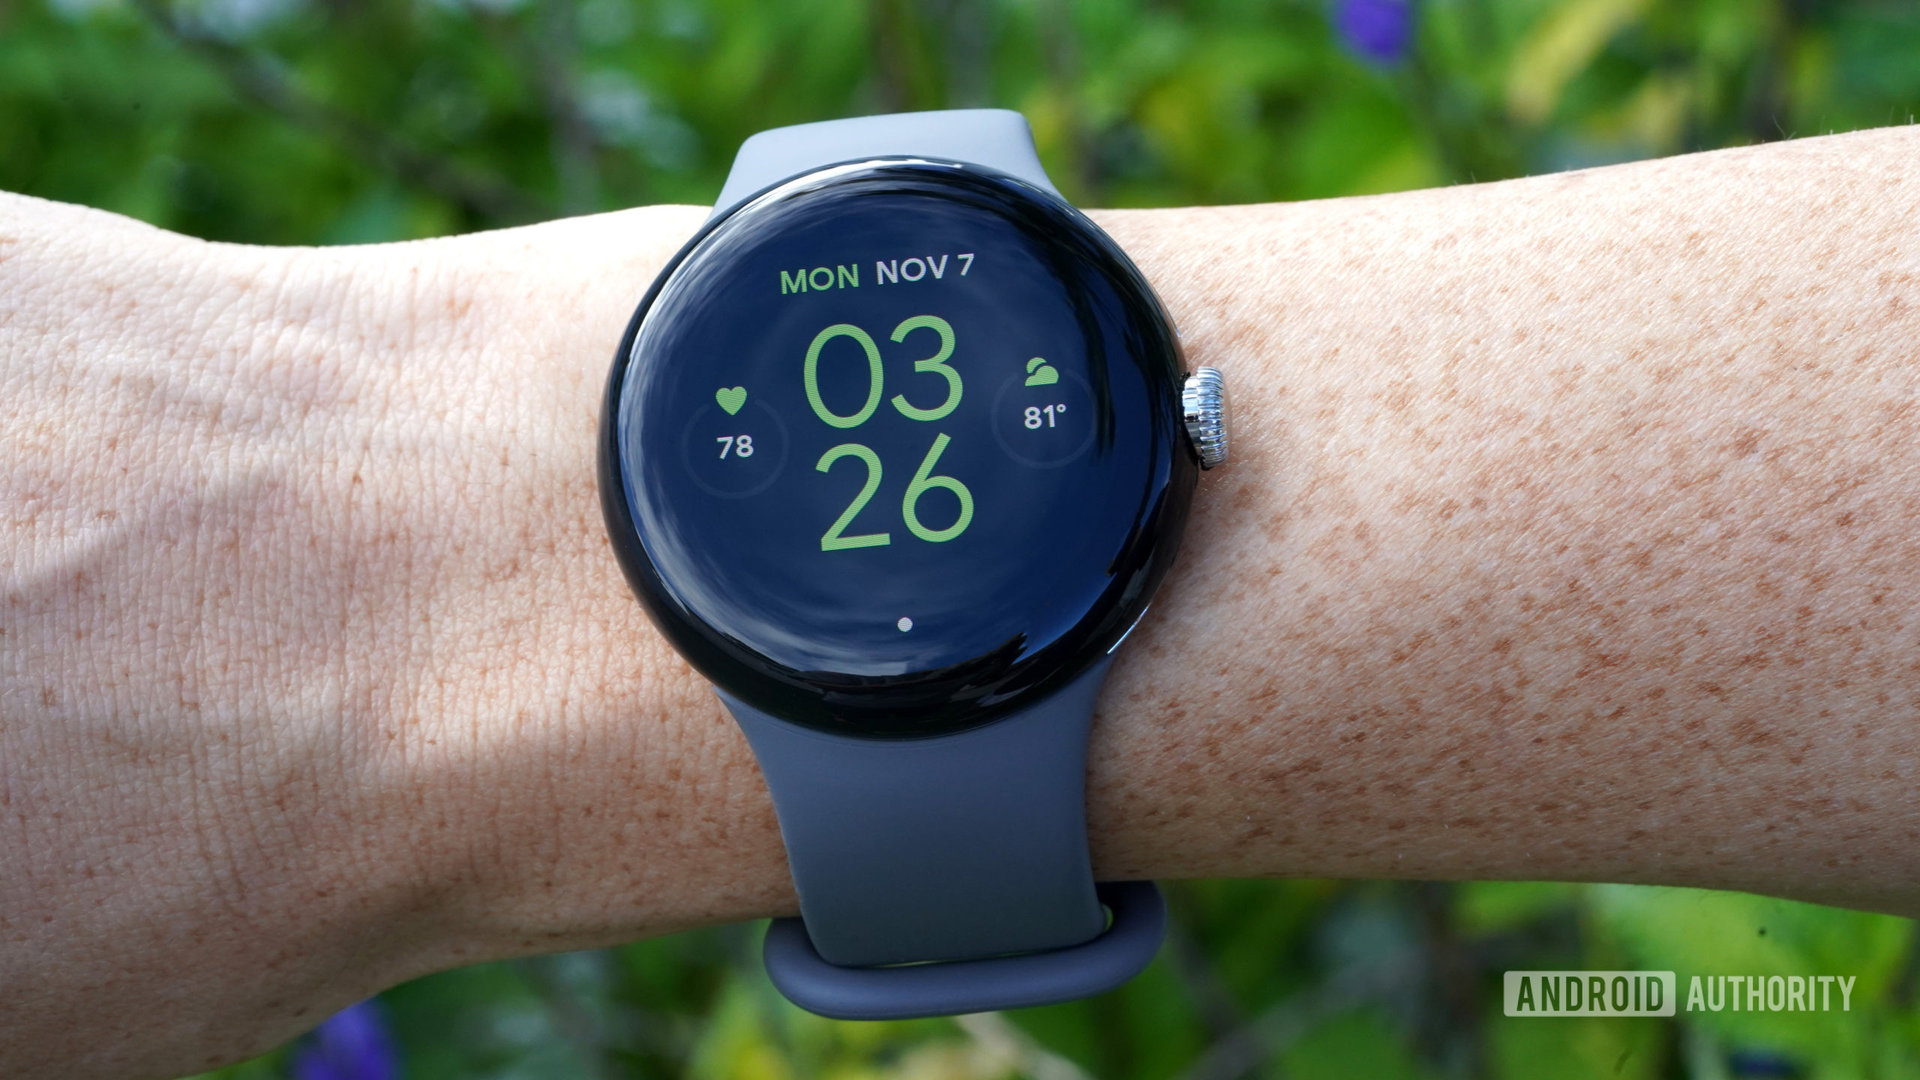 A Google Pixel Watch on a user's wrist displays the watch face.